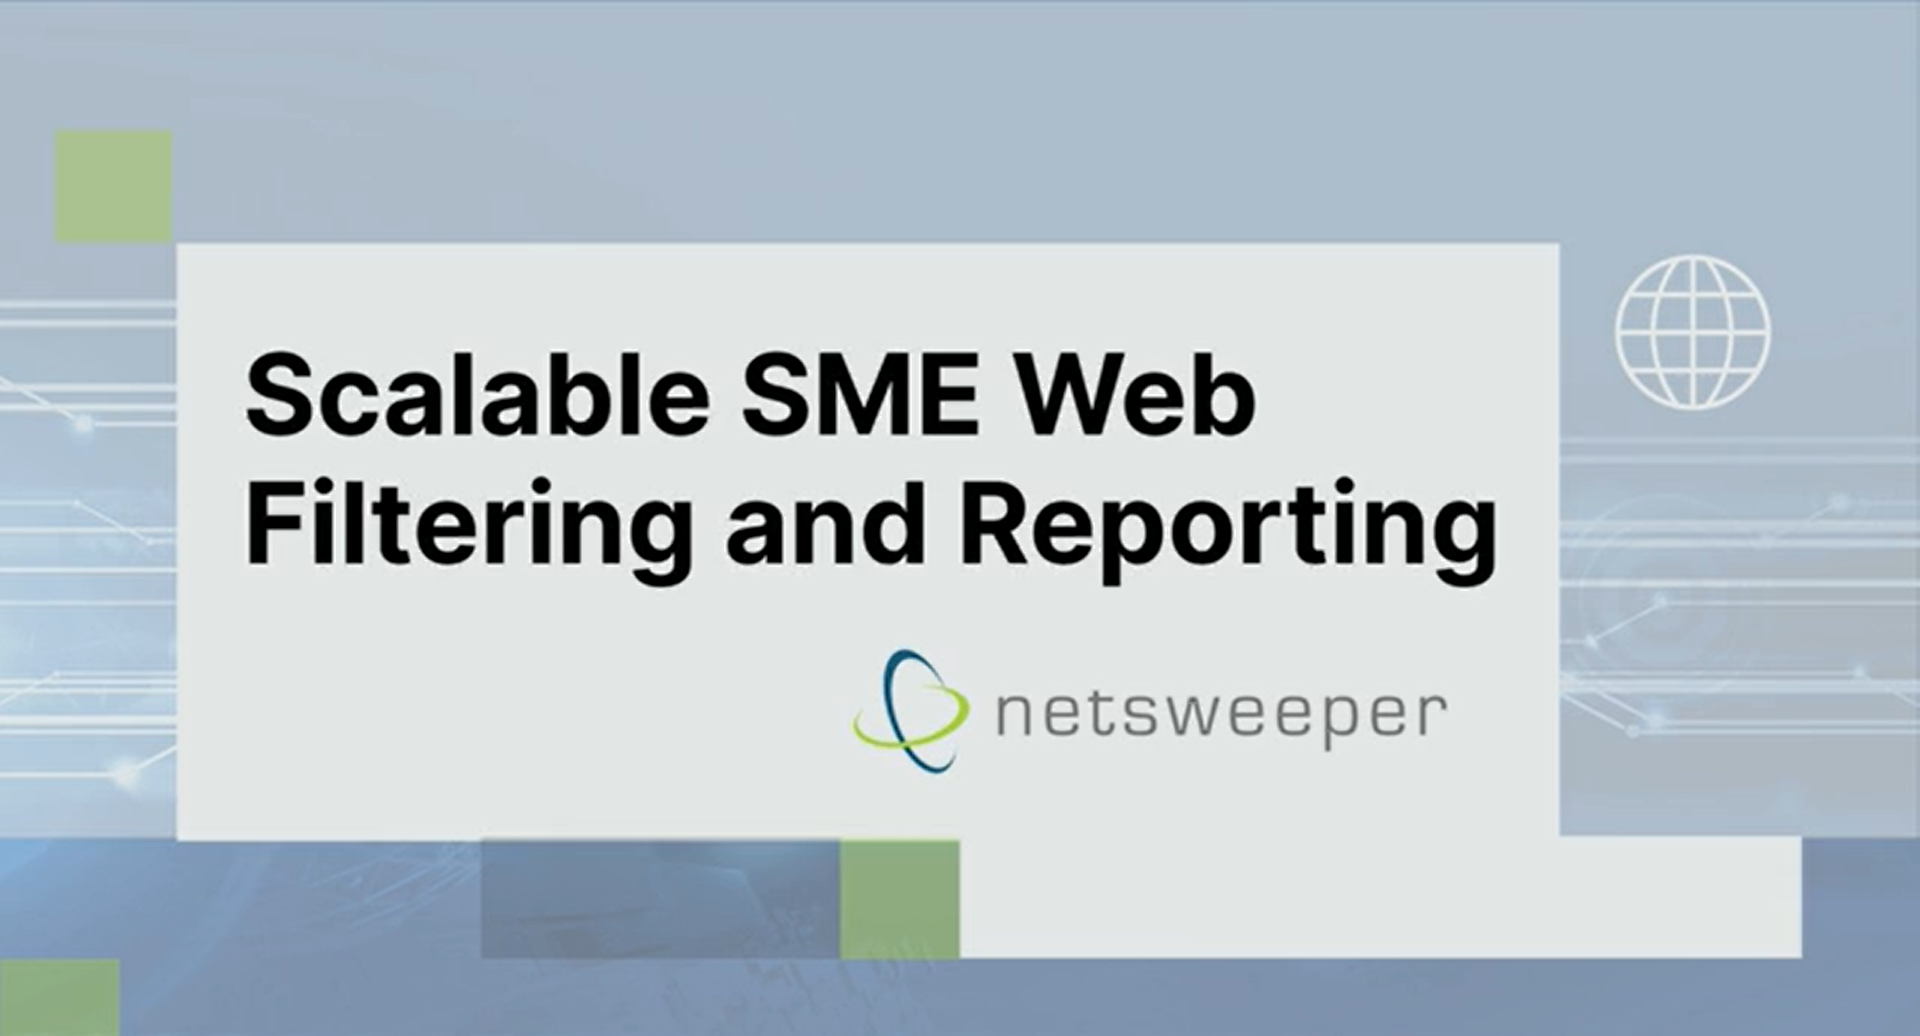 Scalable SME Web Filtering and Reporting Video